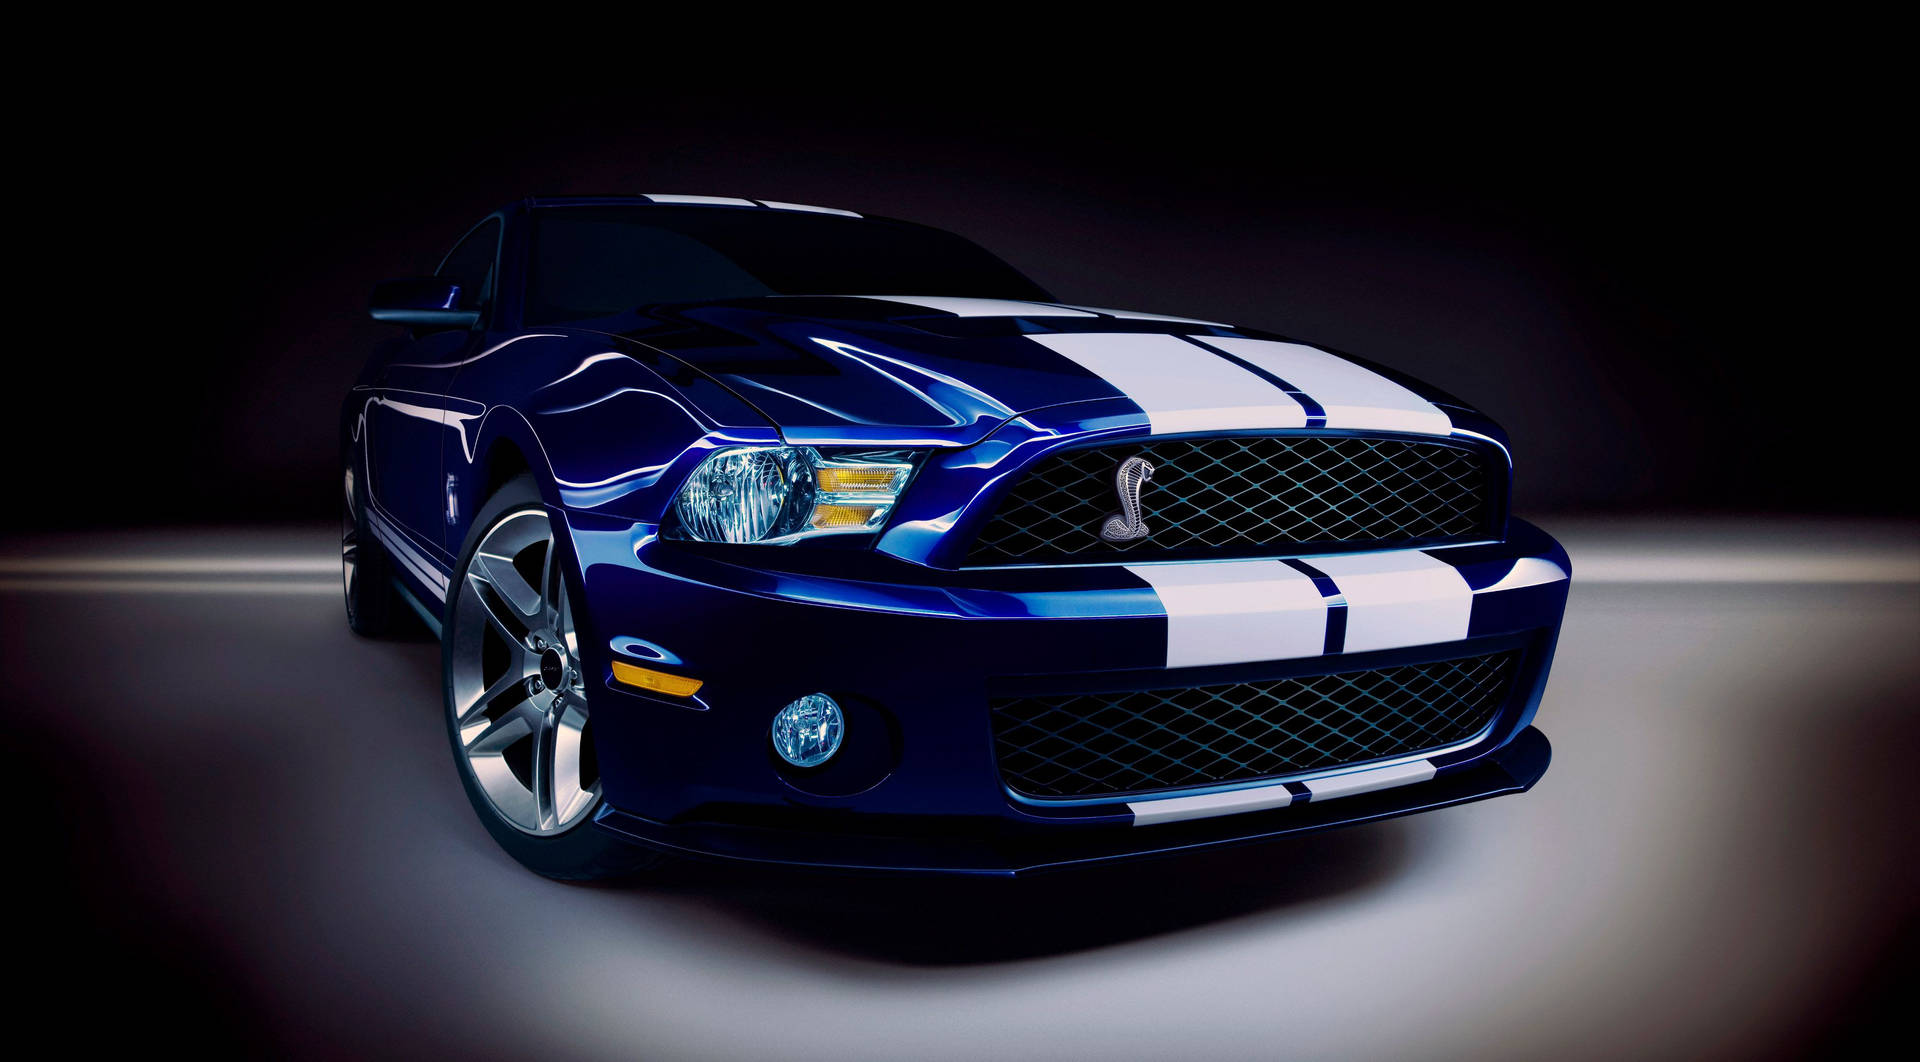 Ford Mustang GT With Stripes Wallpaper